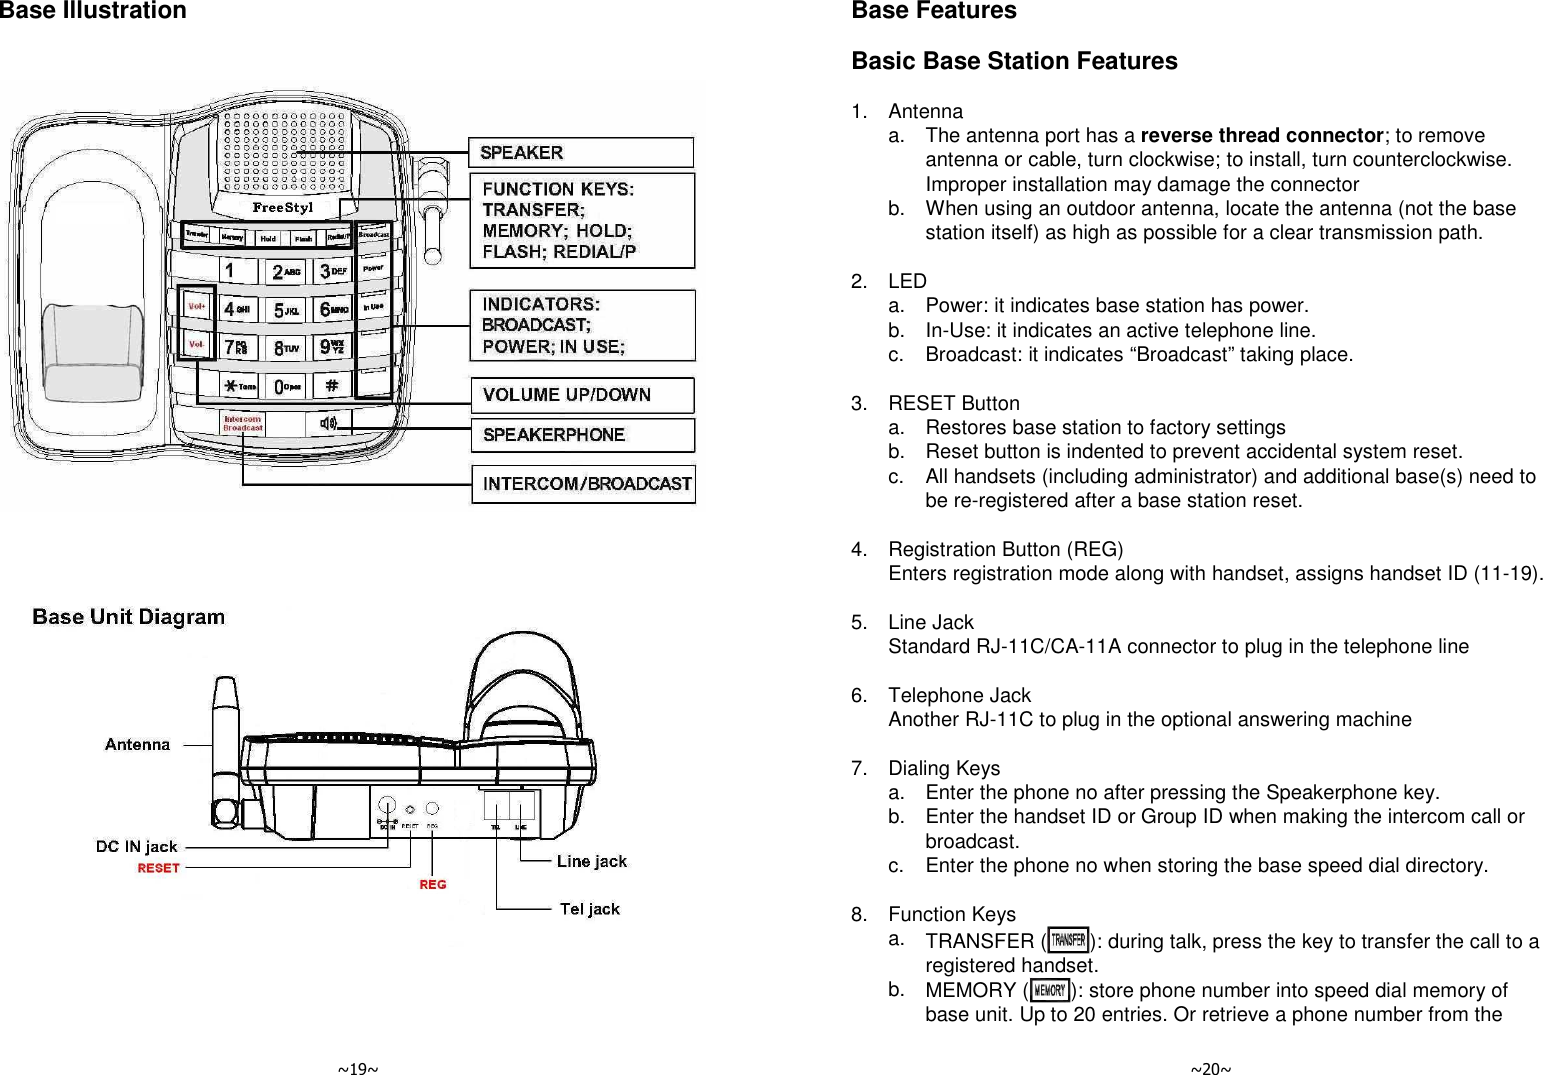   ~19~ Base Illustration          ~20~ Base Features  Basic Base Station Features  1.  Antenna   a.  The antenna port has a reverse thread connector; to remove antenna or cable, turn clockwise; to install, turn counterclockwise.  Improper installation may damage the connector    b.  When using an outdoor antenna, locate the antenna (not the base station itself) as high as possible for a clear transmission path.    2.  LED   a.  Power: it indicates base station has power.   b.  In-Use: it indicates an active telephone line.   c.  Broadcast: it indicates “Broadcast” taking place.    3.  RESET Button   a.  Restores base station to factory settings   b.  Reset button is indented to prevent accidental system reset.   c.  All handsets (including administrator) and additional base(s) need to be re-registered after a base station reset.    4.  Registration Button (REG)   Enters registration mode along with handset, assigns handset ID (11-19).    5.  Line Jack   Standard RJ-11C/CA-11A connector to plug in the telephone line    6.  Telephone Jack    Another RJ-11C to plug in the optional answering machine    7.  Dialing Keys   a.  Enter the phone no after pressing the Speakerphone key.   b.  Enter the handset ID or Group ID when making the intercom call or broadcast.   c.  Enter the phone no when storing the base speed dial directory.    8.  Function Keys   a.  TRANSFER ( ): during talk, press the key to transfer the call to a registered handset.   b.  MEMORY ( ): store phone number into speed dial memory of base unit. Up to 20 entries. Or retrieve a phone number from the 